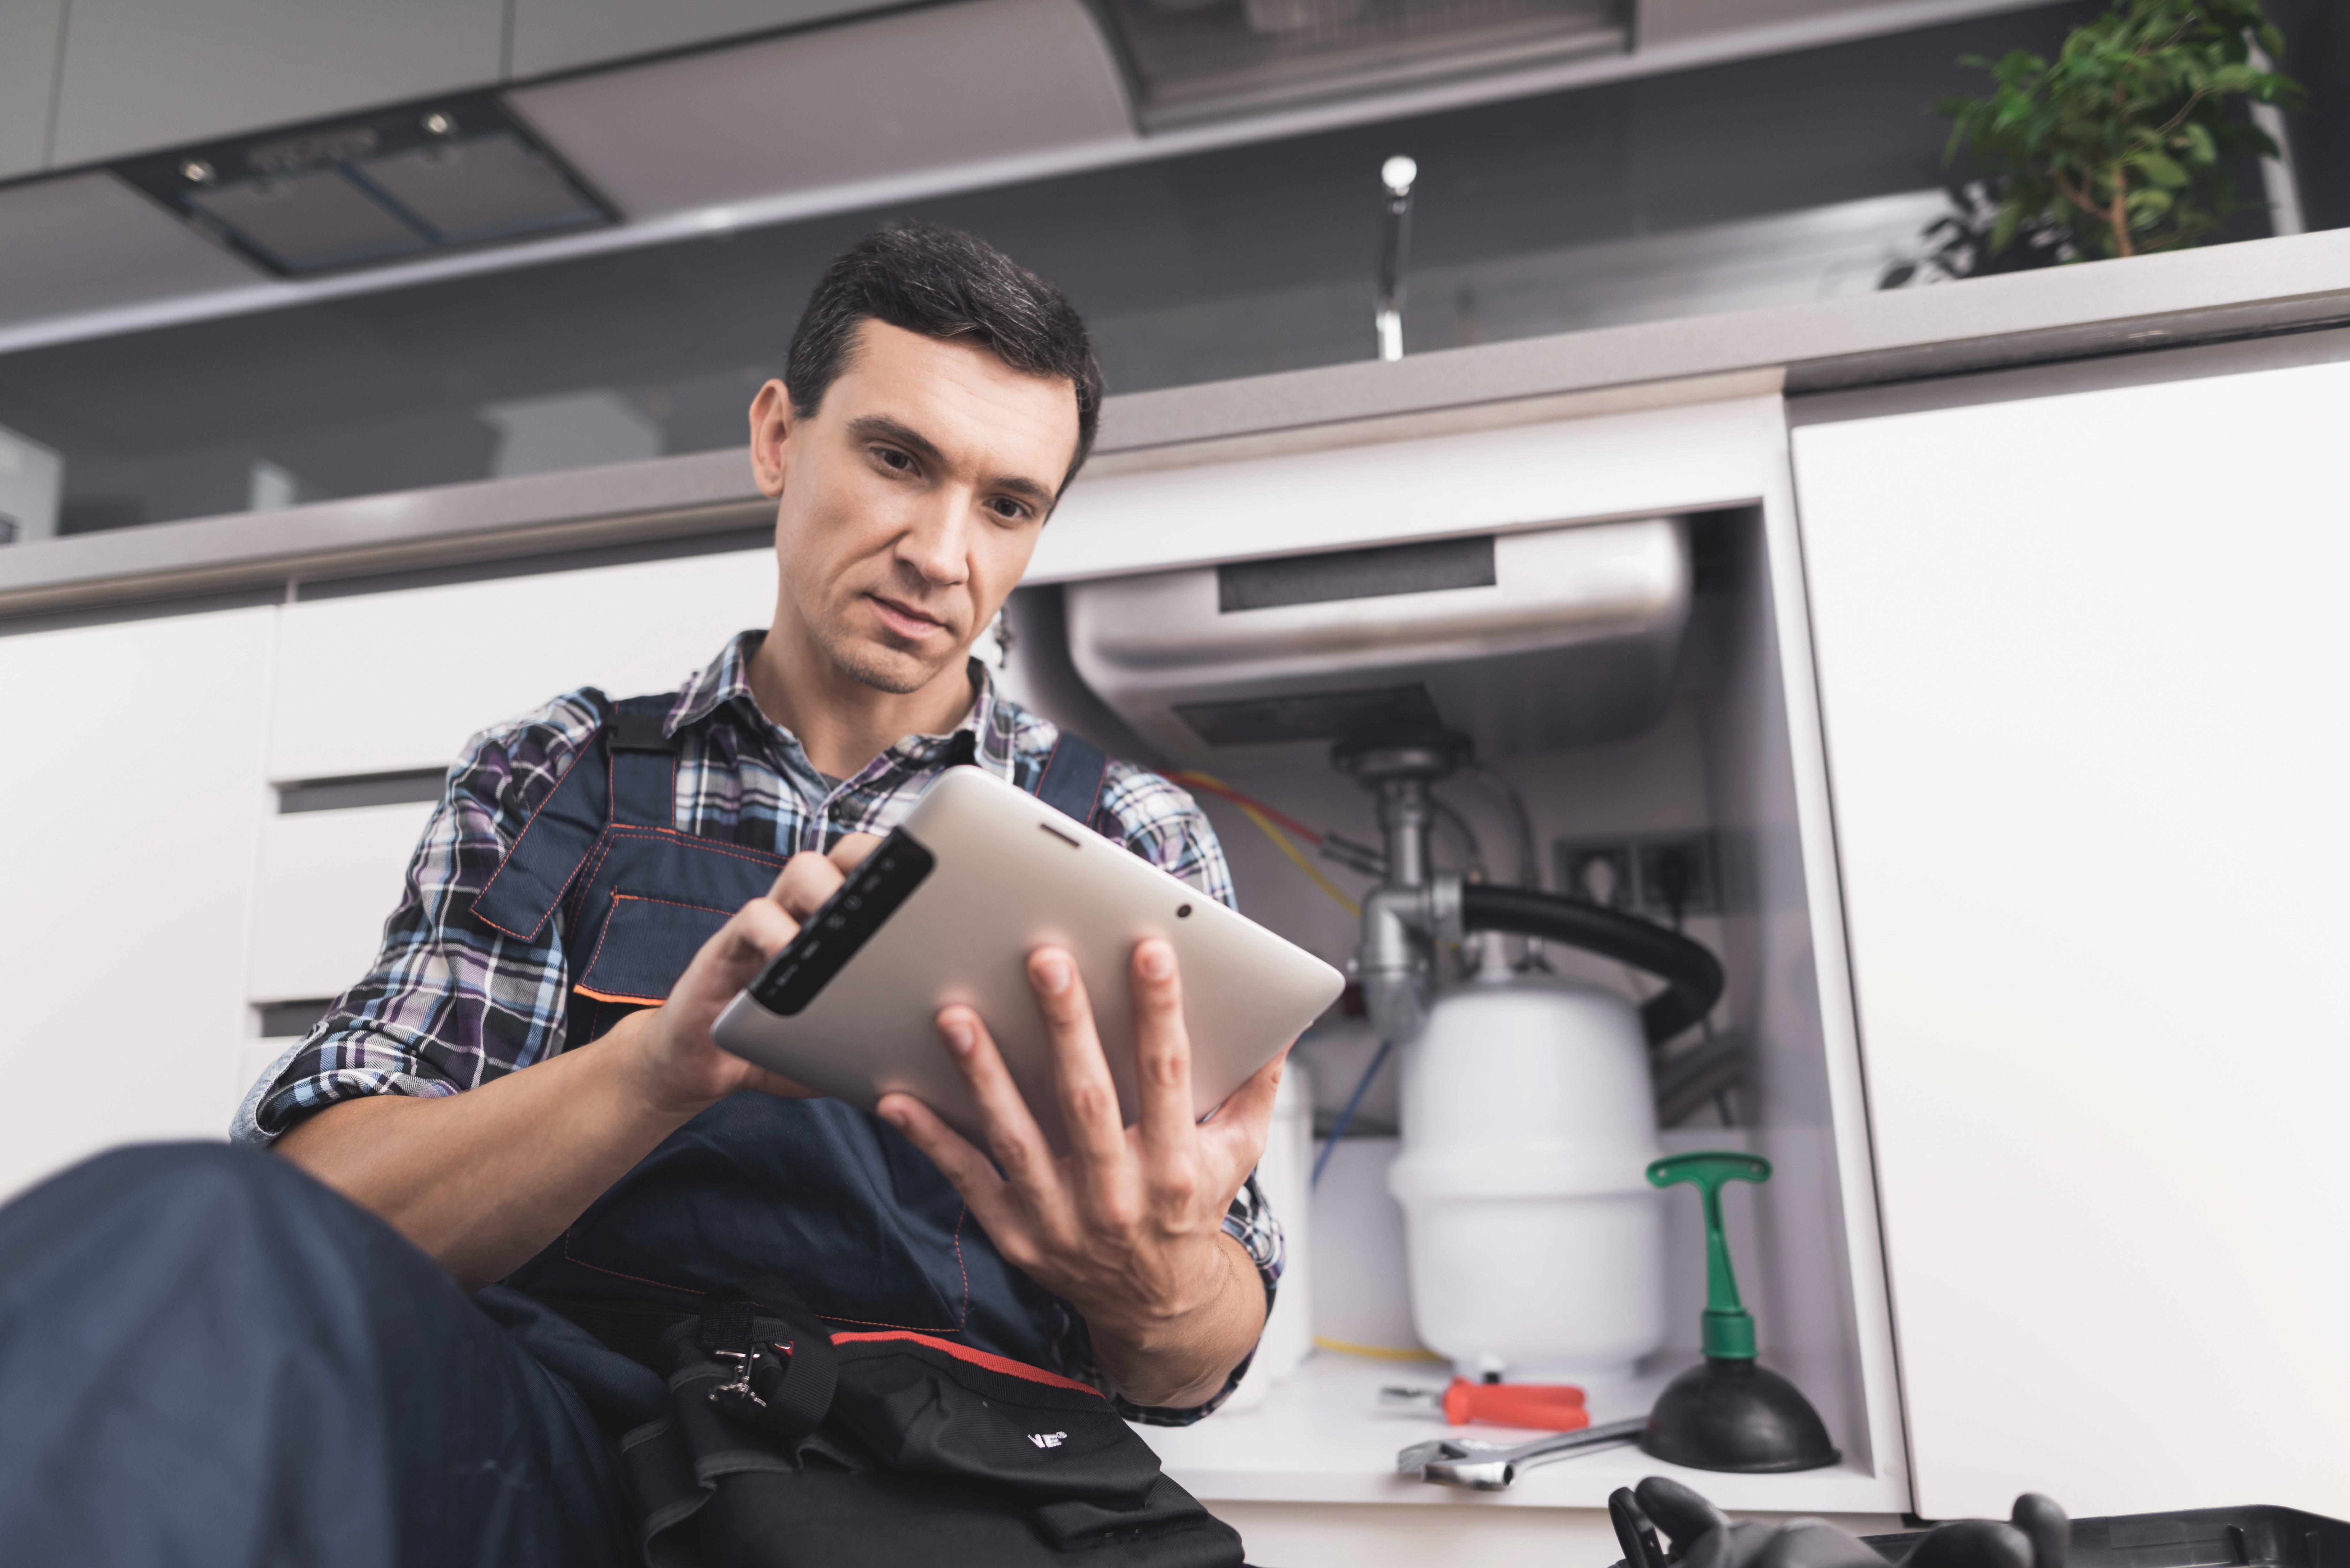 A plumber sits in front of a kitchen sink while he reviews his tablet.